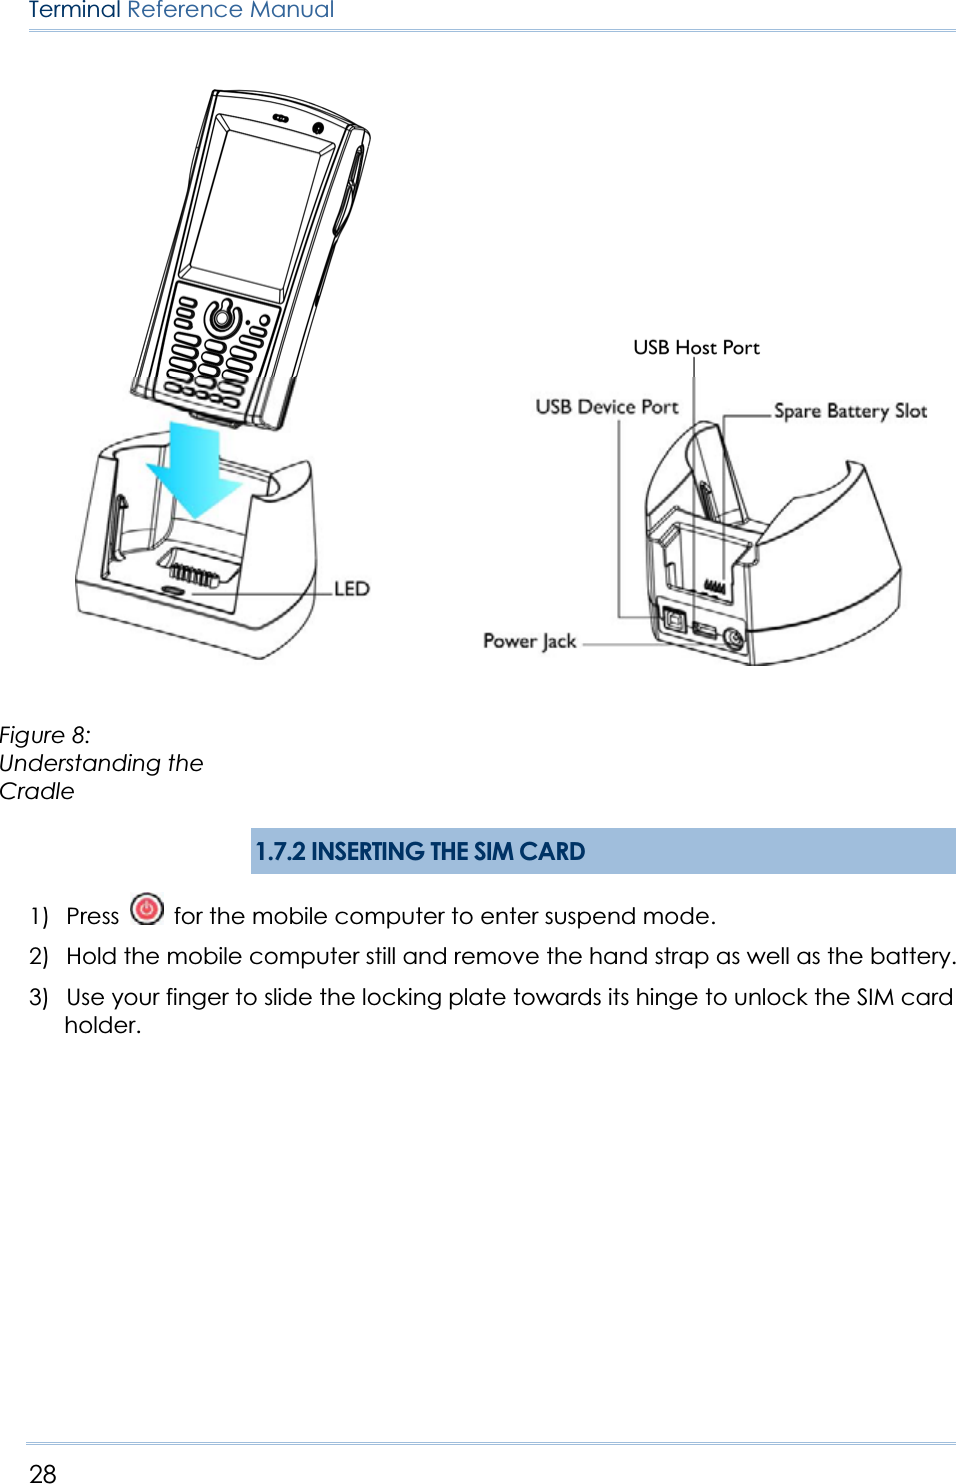 28Terminal Reference Manual1.7.2 INSERTING THE SIM CARD 1) Press   for the mobile computer to enter suspend mode. 2) Hold the mobile computer still and remove the hand strap as well as the battery. 3) Use your finger to slide the locking plate towards its hinge to unlock the SIM card holder. Figure 8: Understanding the Cradle